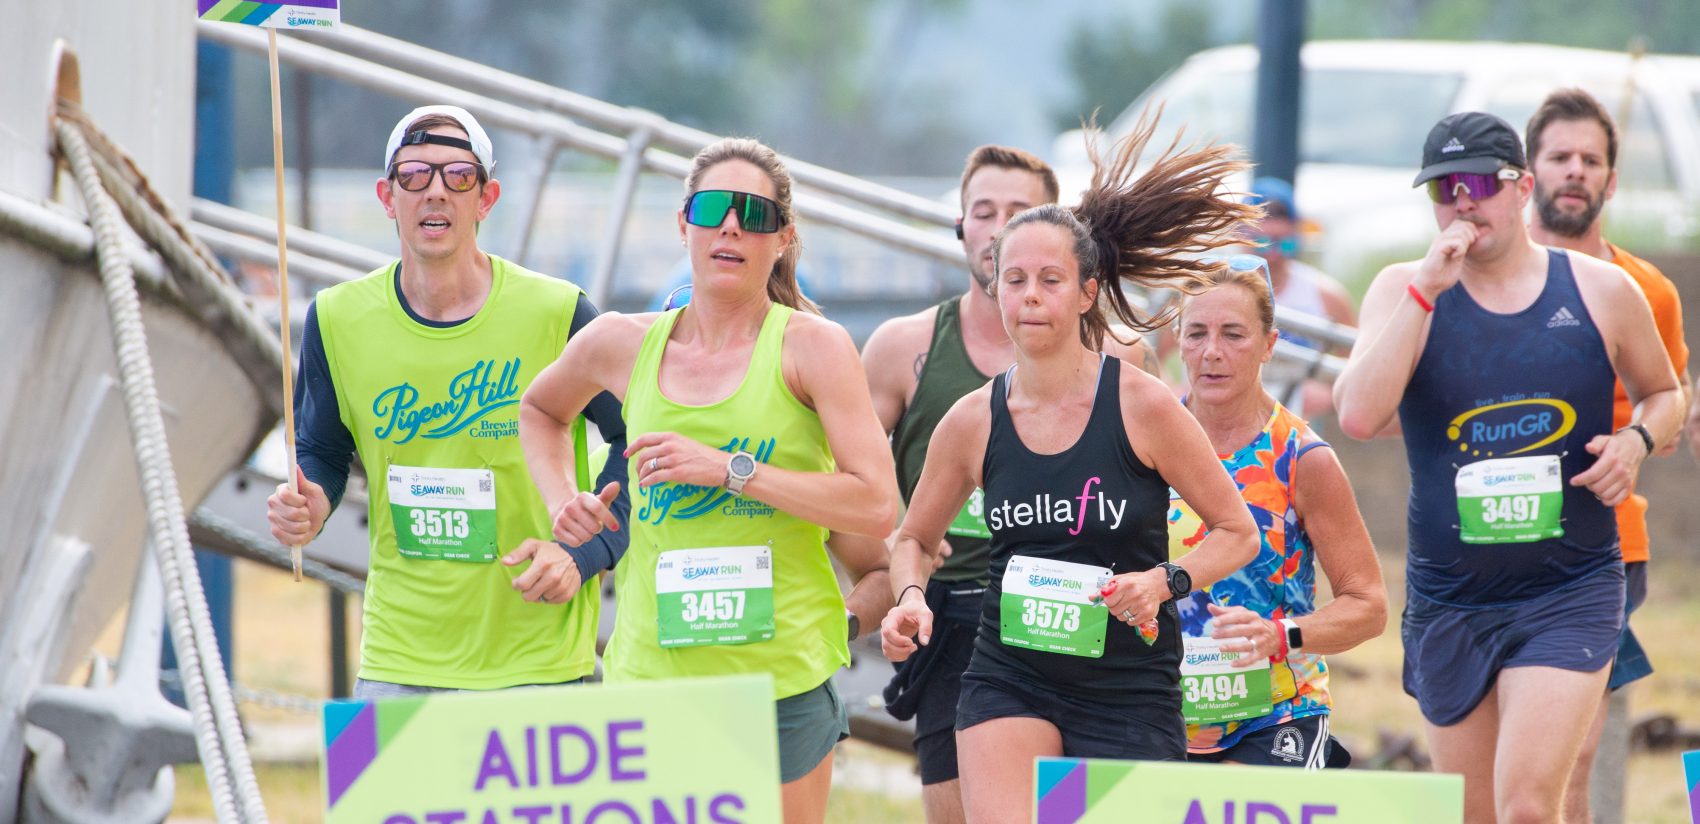 Muskegon’s Trinity Health Seaway Run attracts masses of runners for 41st annual race